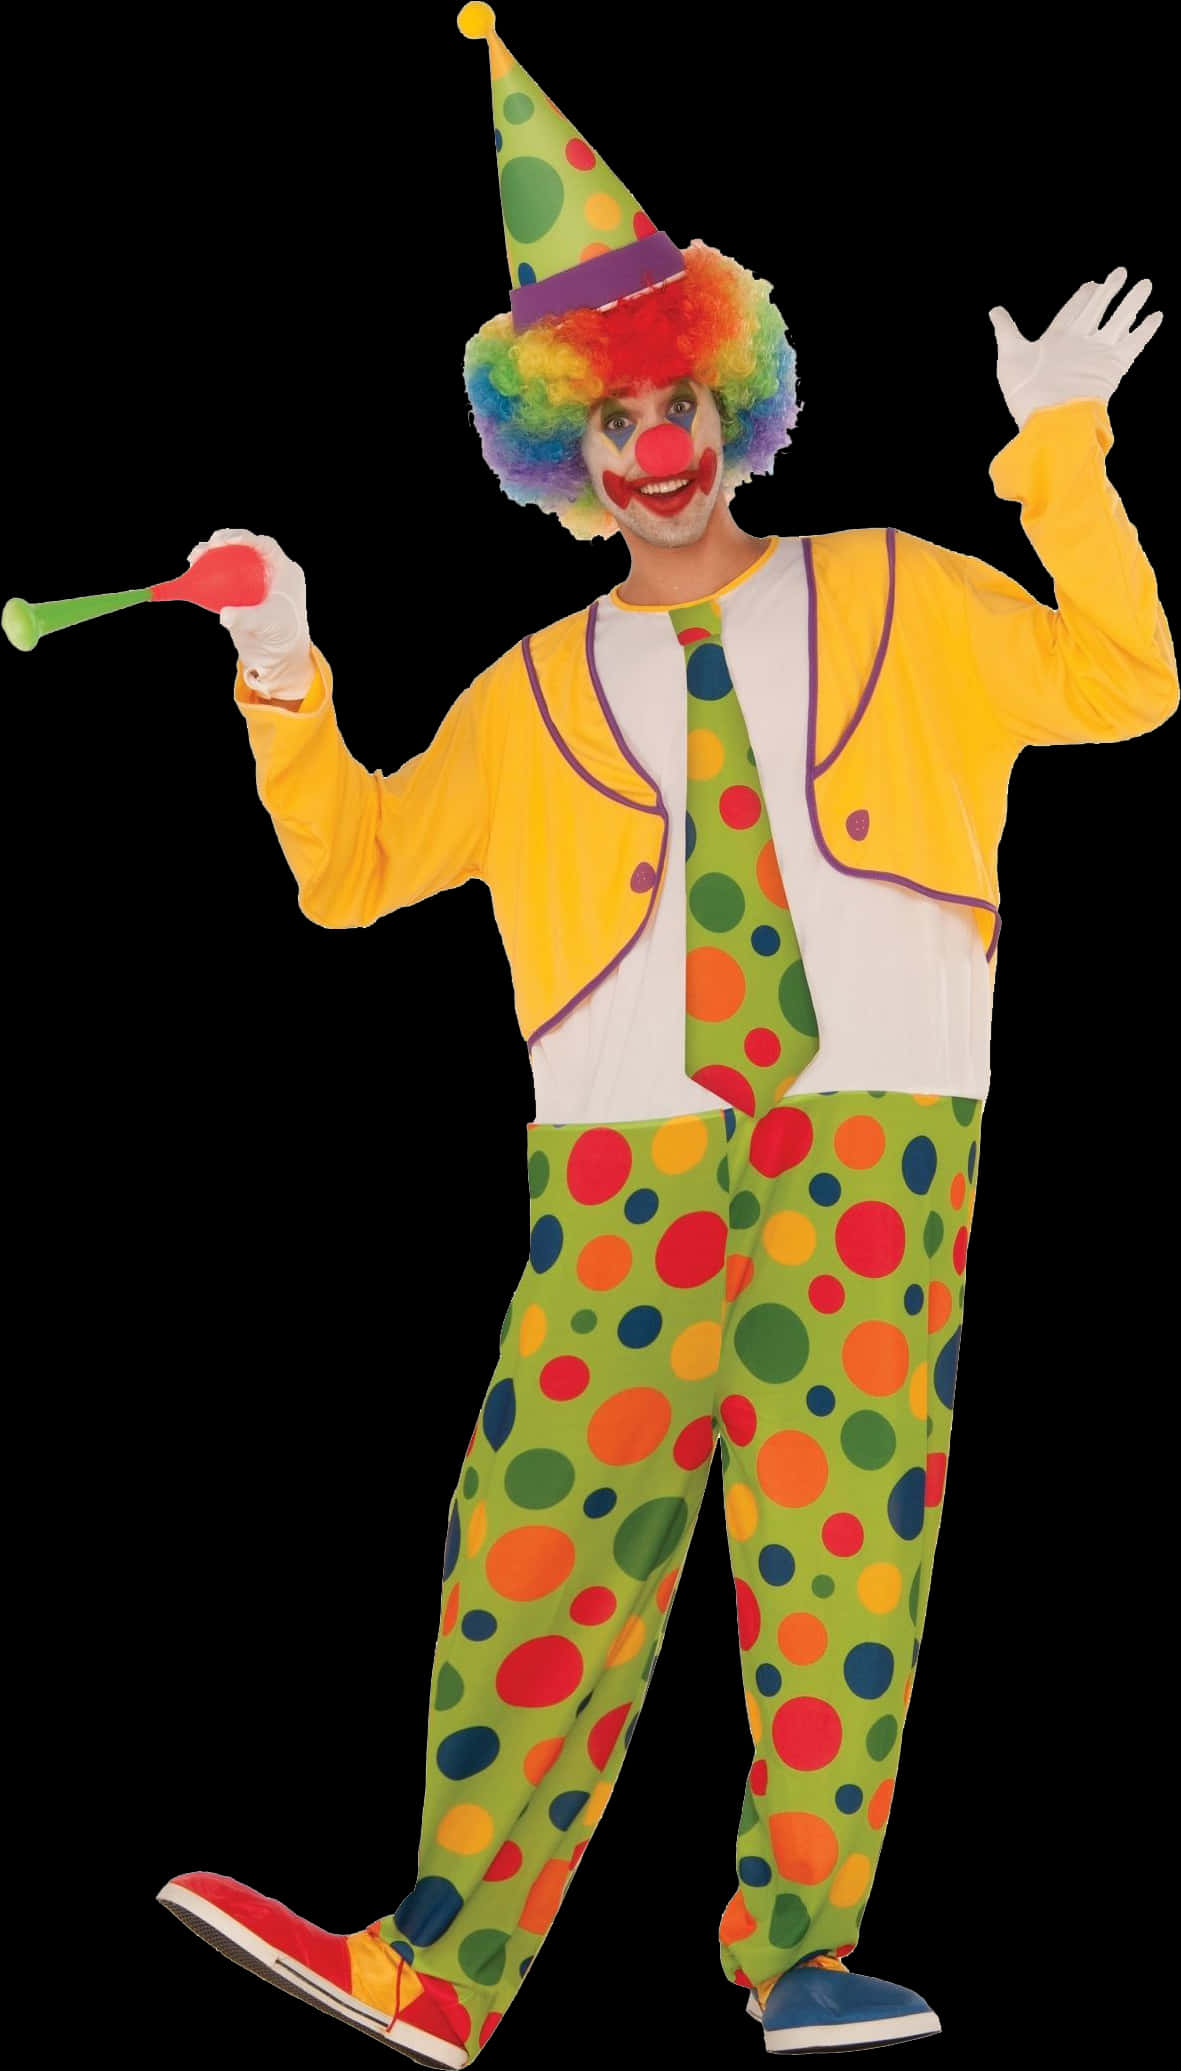 A Clown With A Yellow Shirt And Colorful Polka Dot Pants